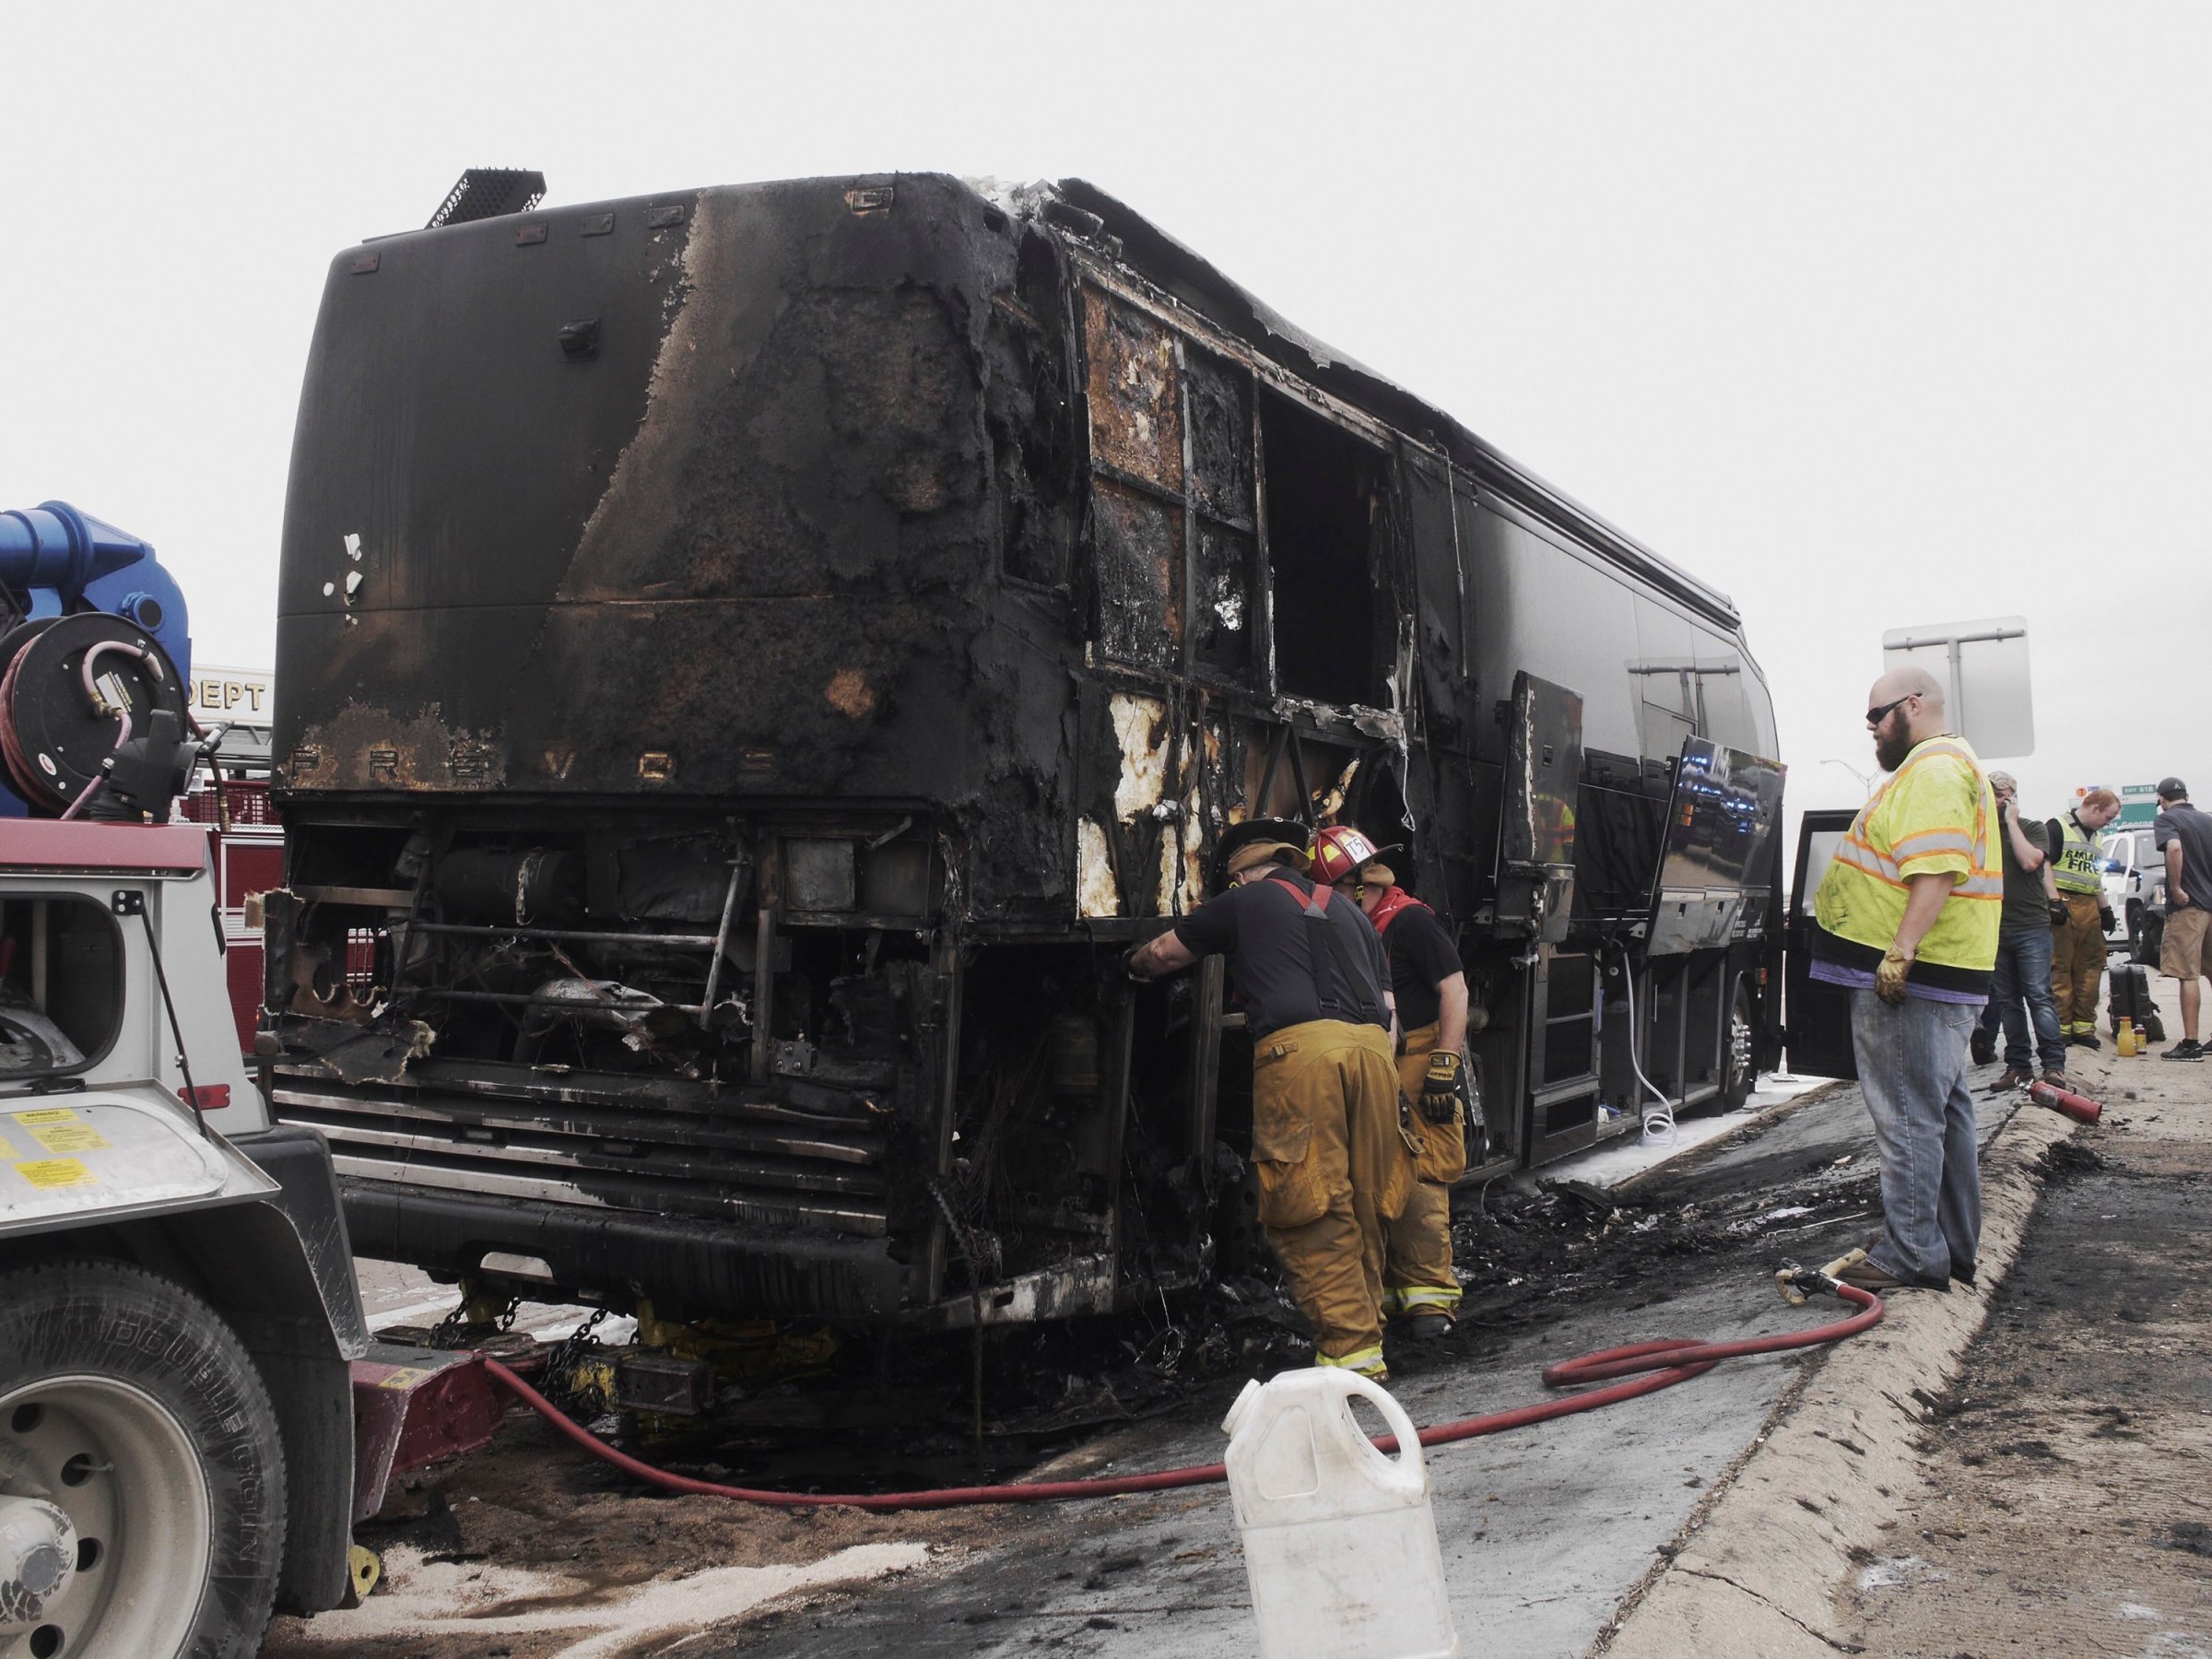 Firemen look at the damage after a fire on Lady Antebellum's bus on eastbound I-30 in Garland, Texas